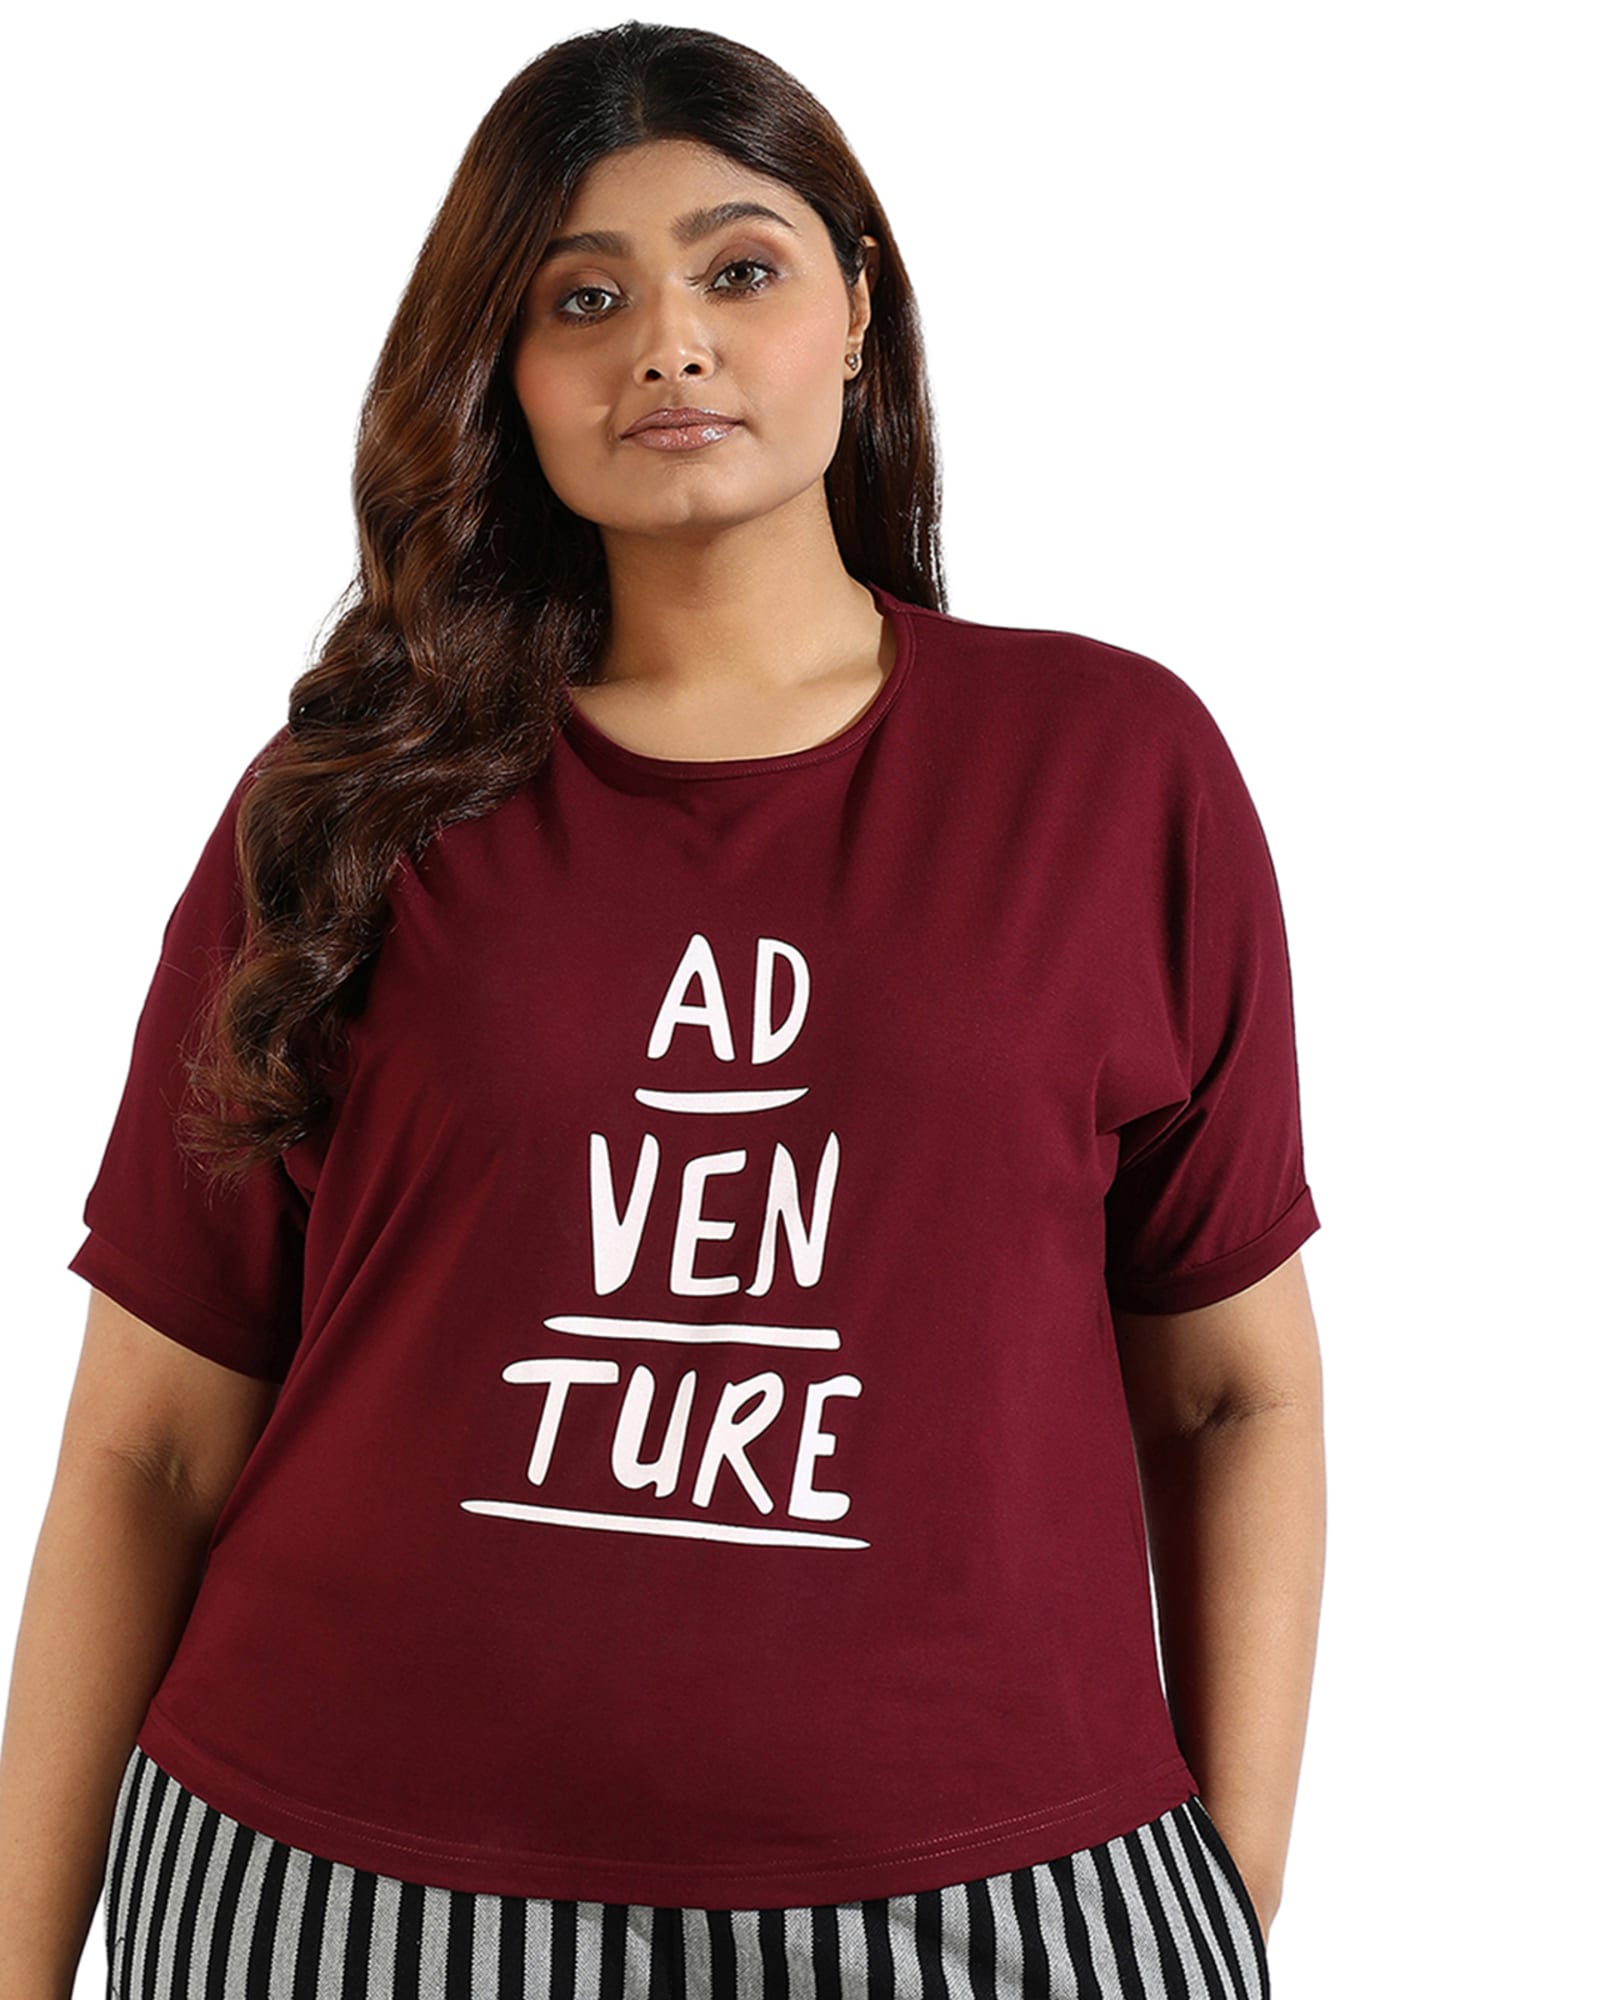 25598303213_9ca4f352c2_k  Plus size outfits, Plus size fashion, Casual plus  size outfits